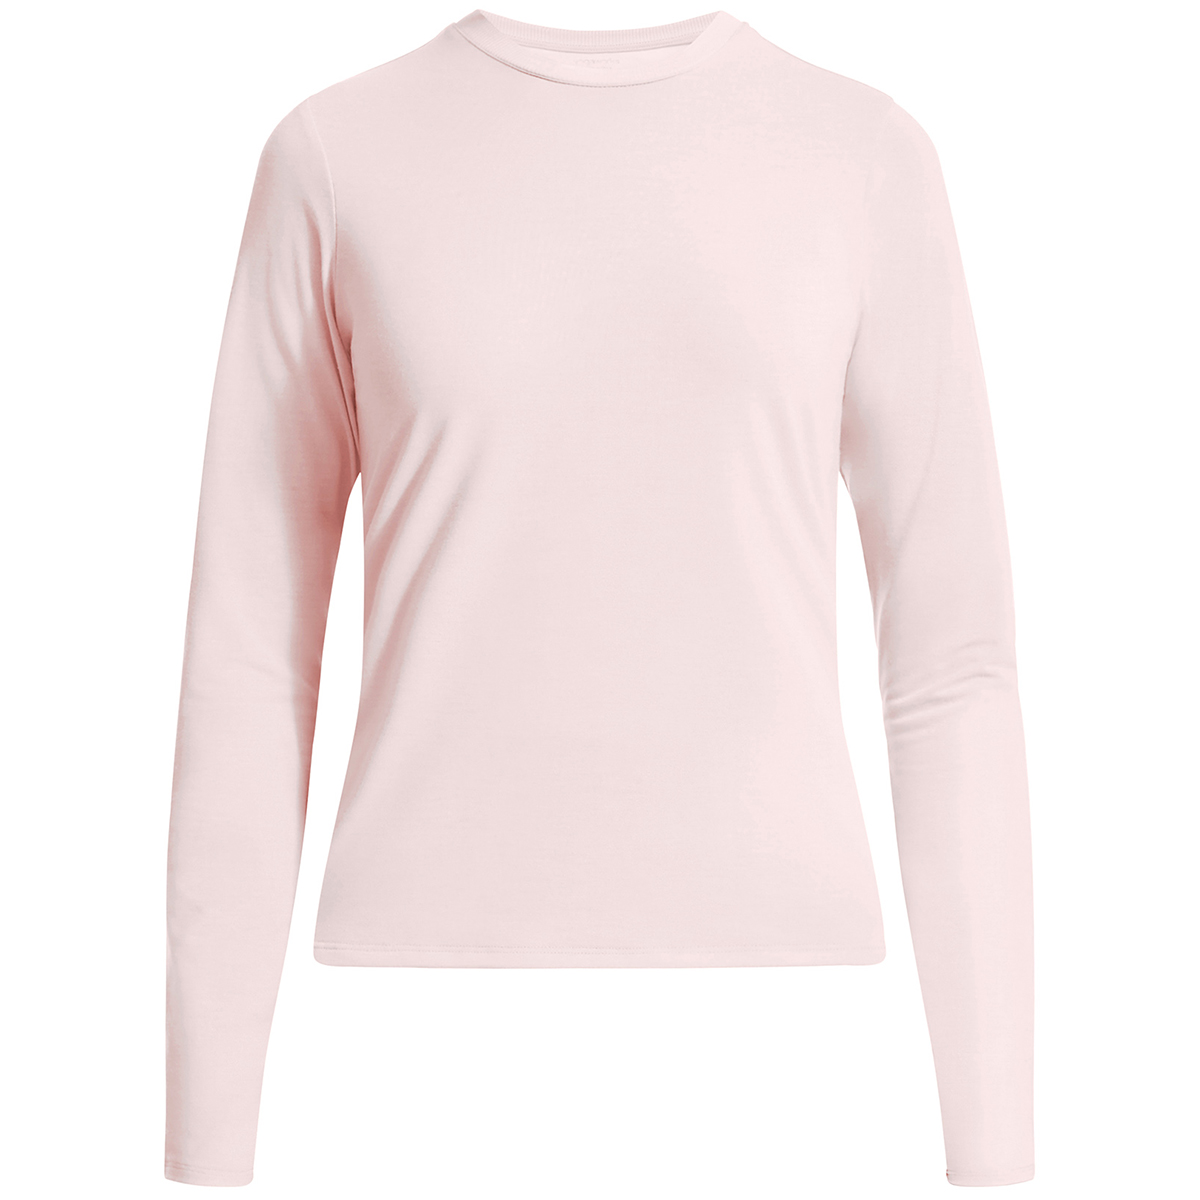 Yogaworks Women's Long-Sleeve Fitted Performance Tee